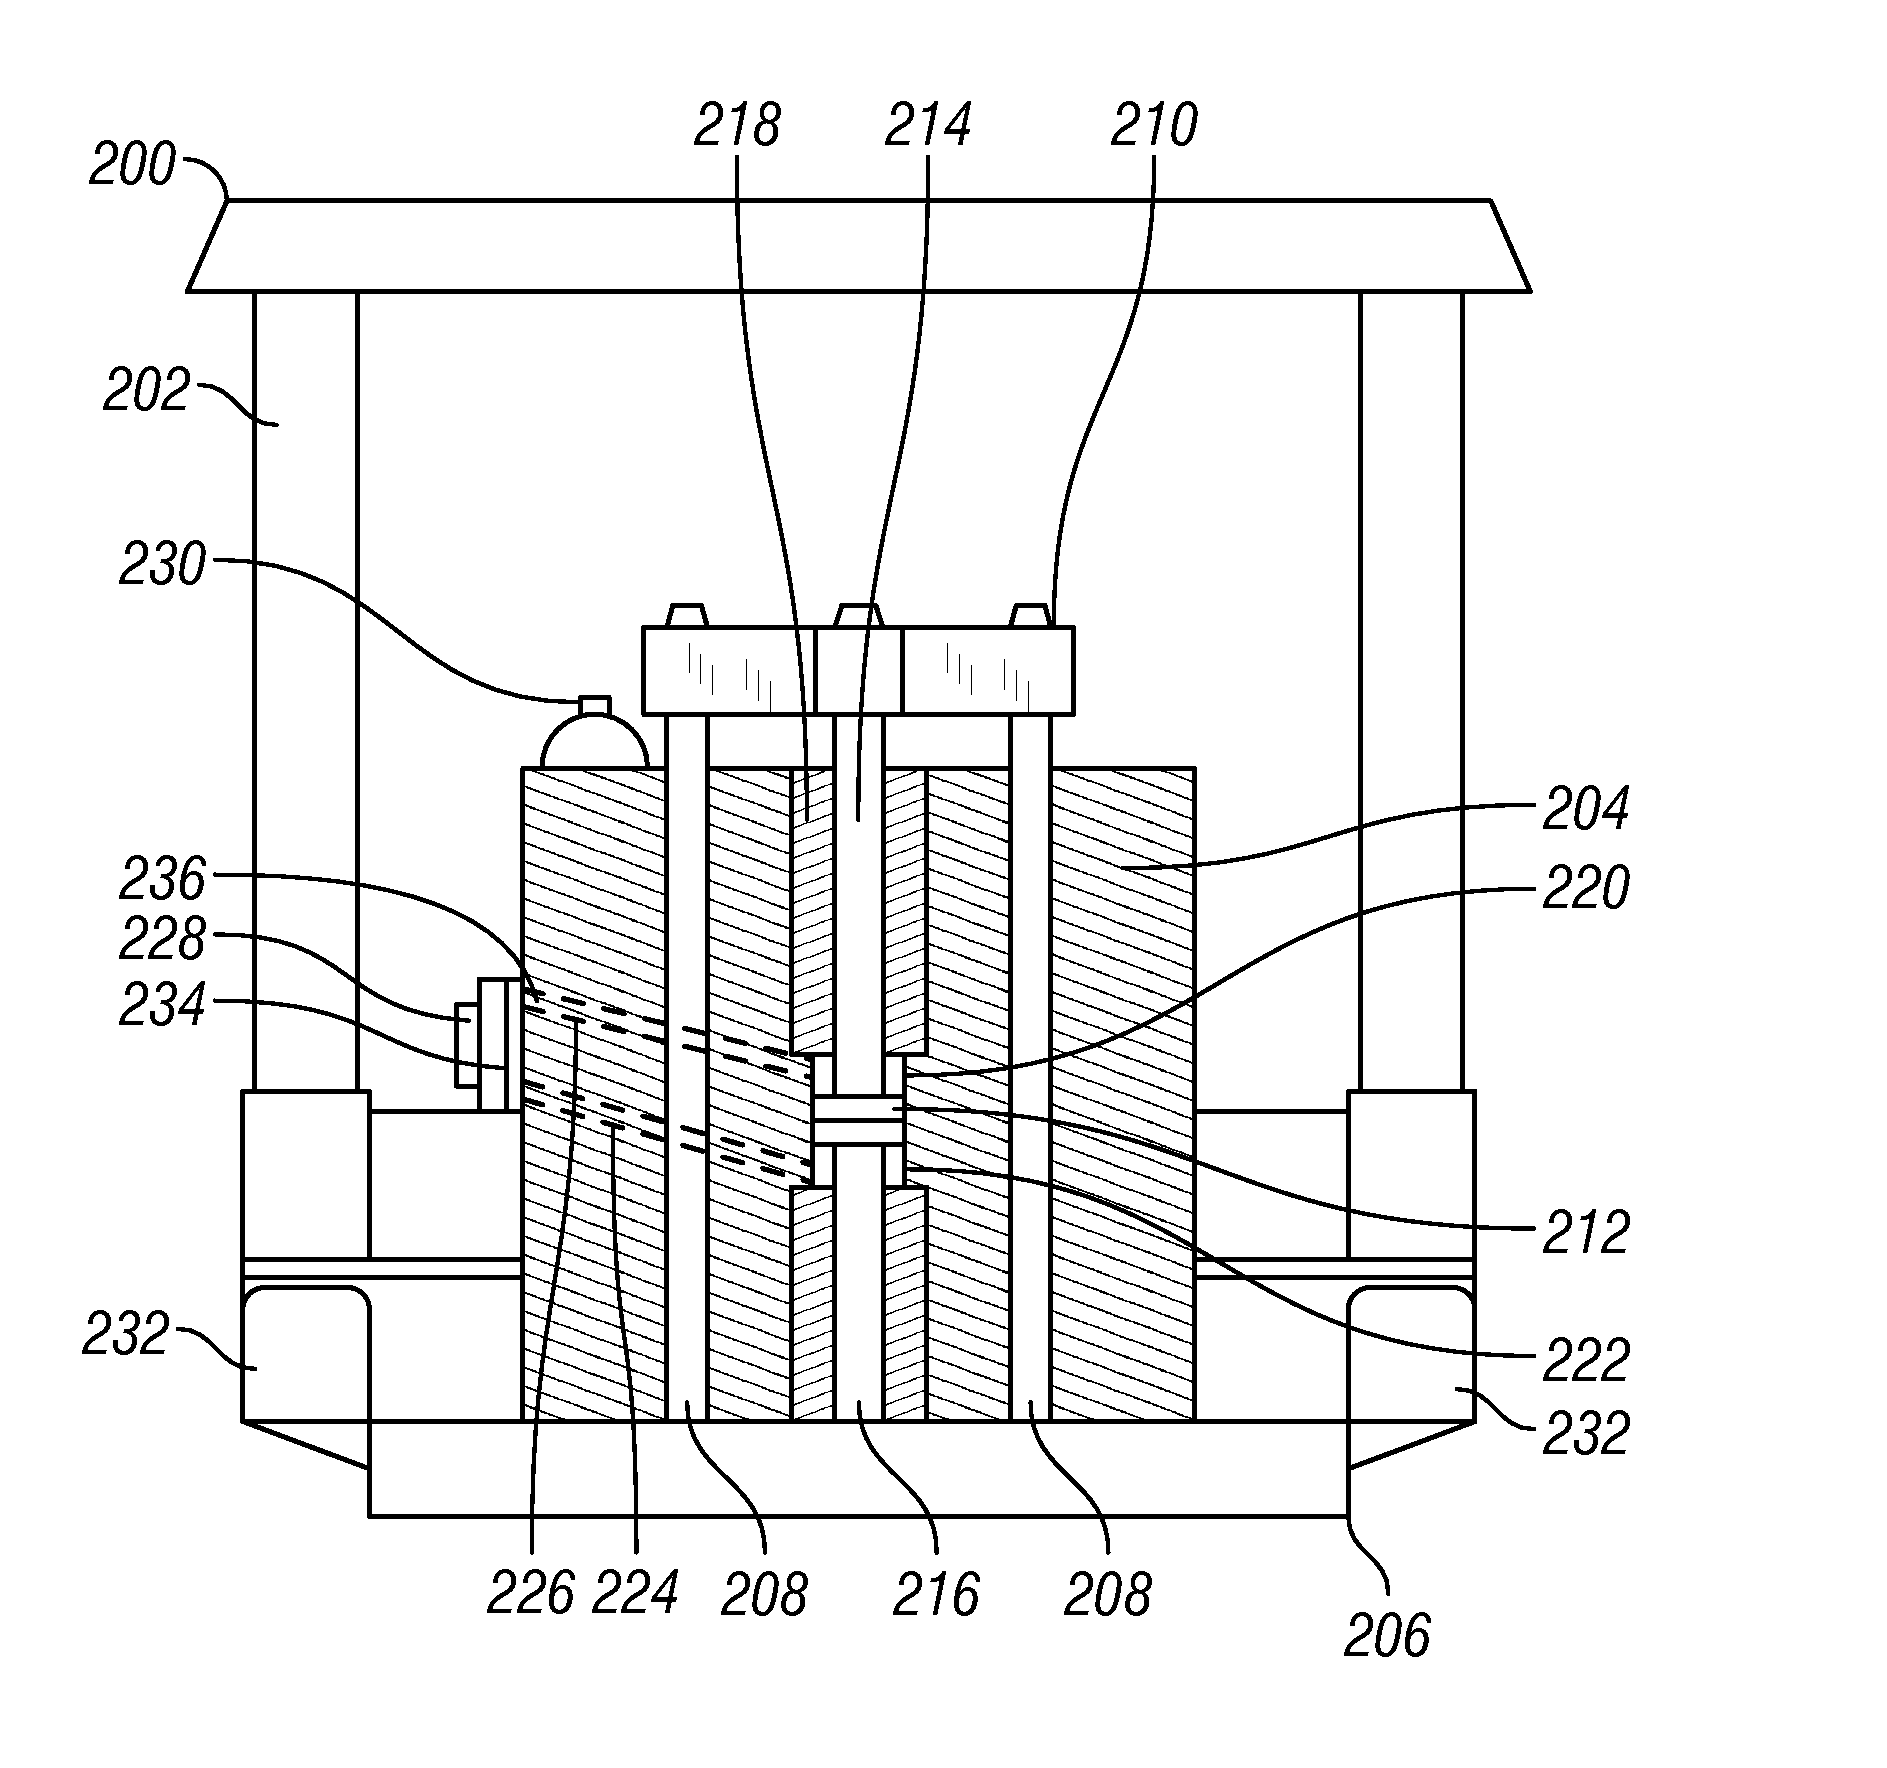 Apparatus and Method for Generating A Seismic Source Signal